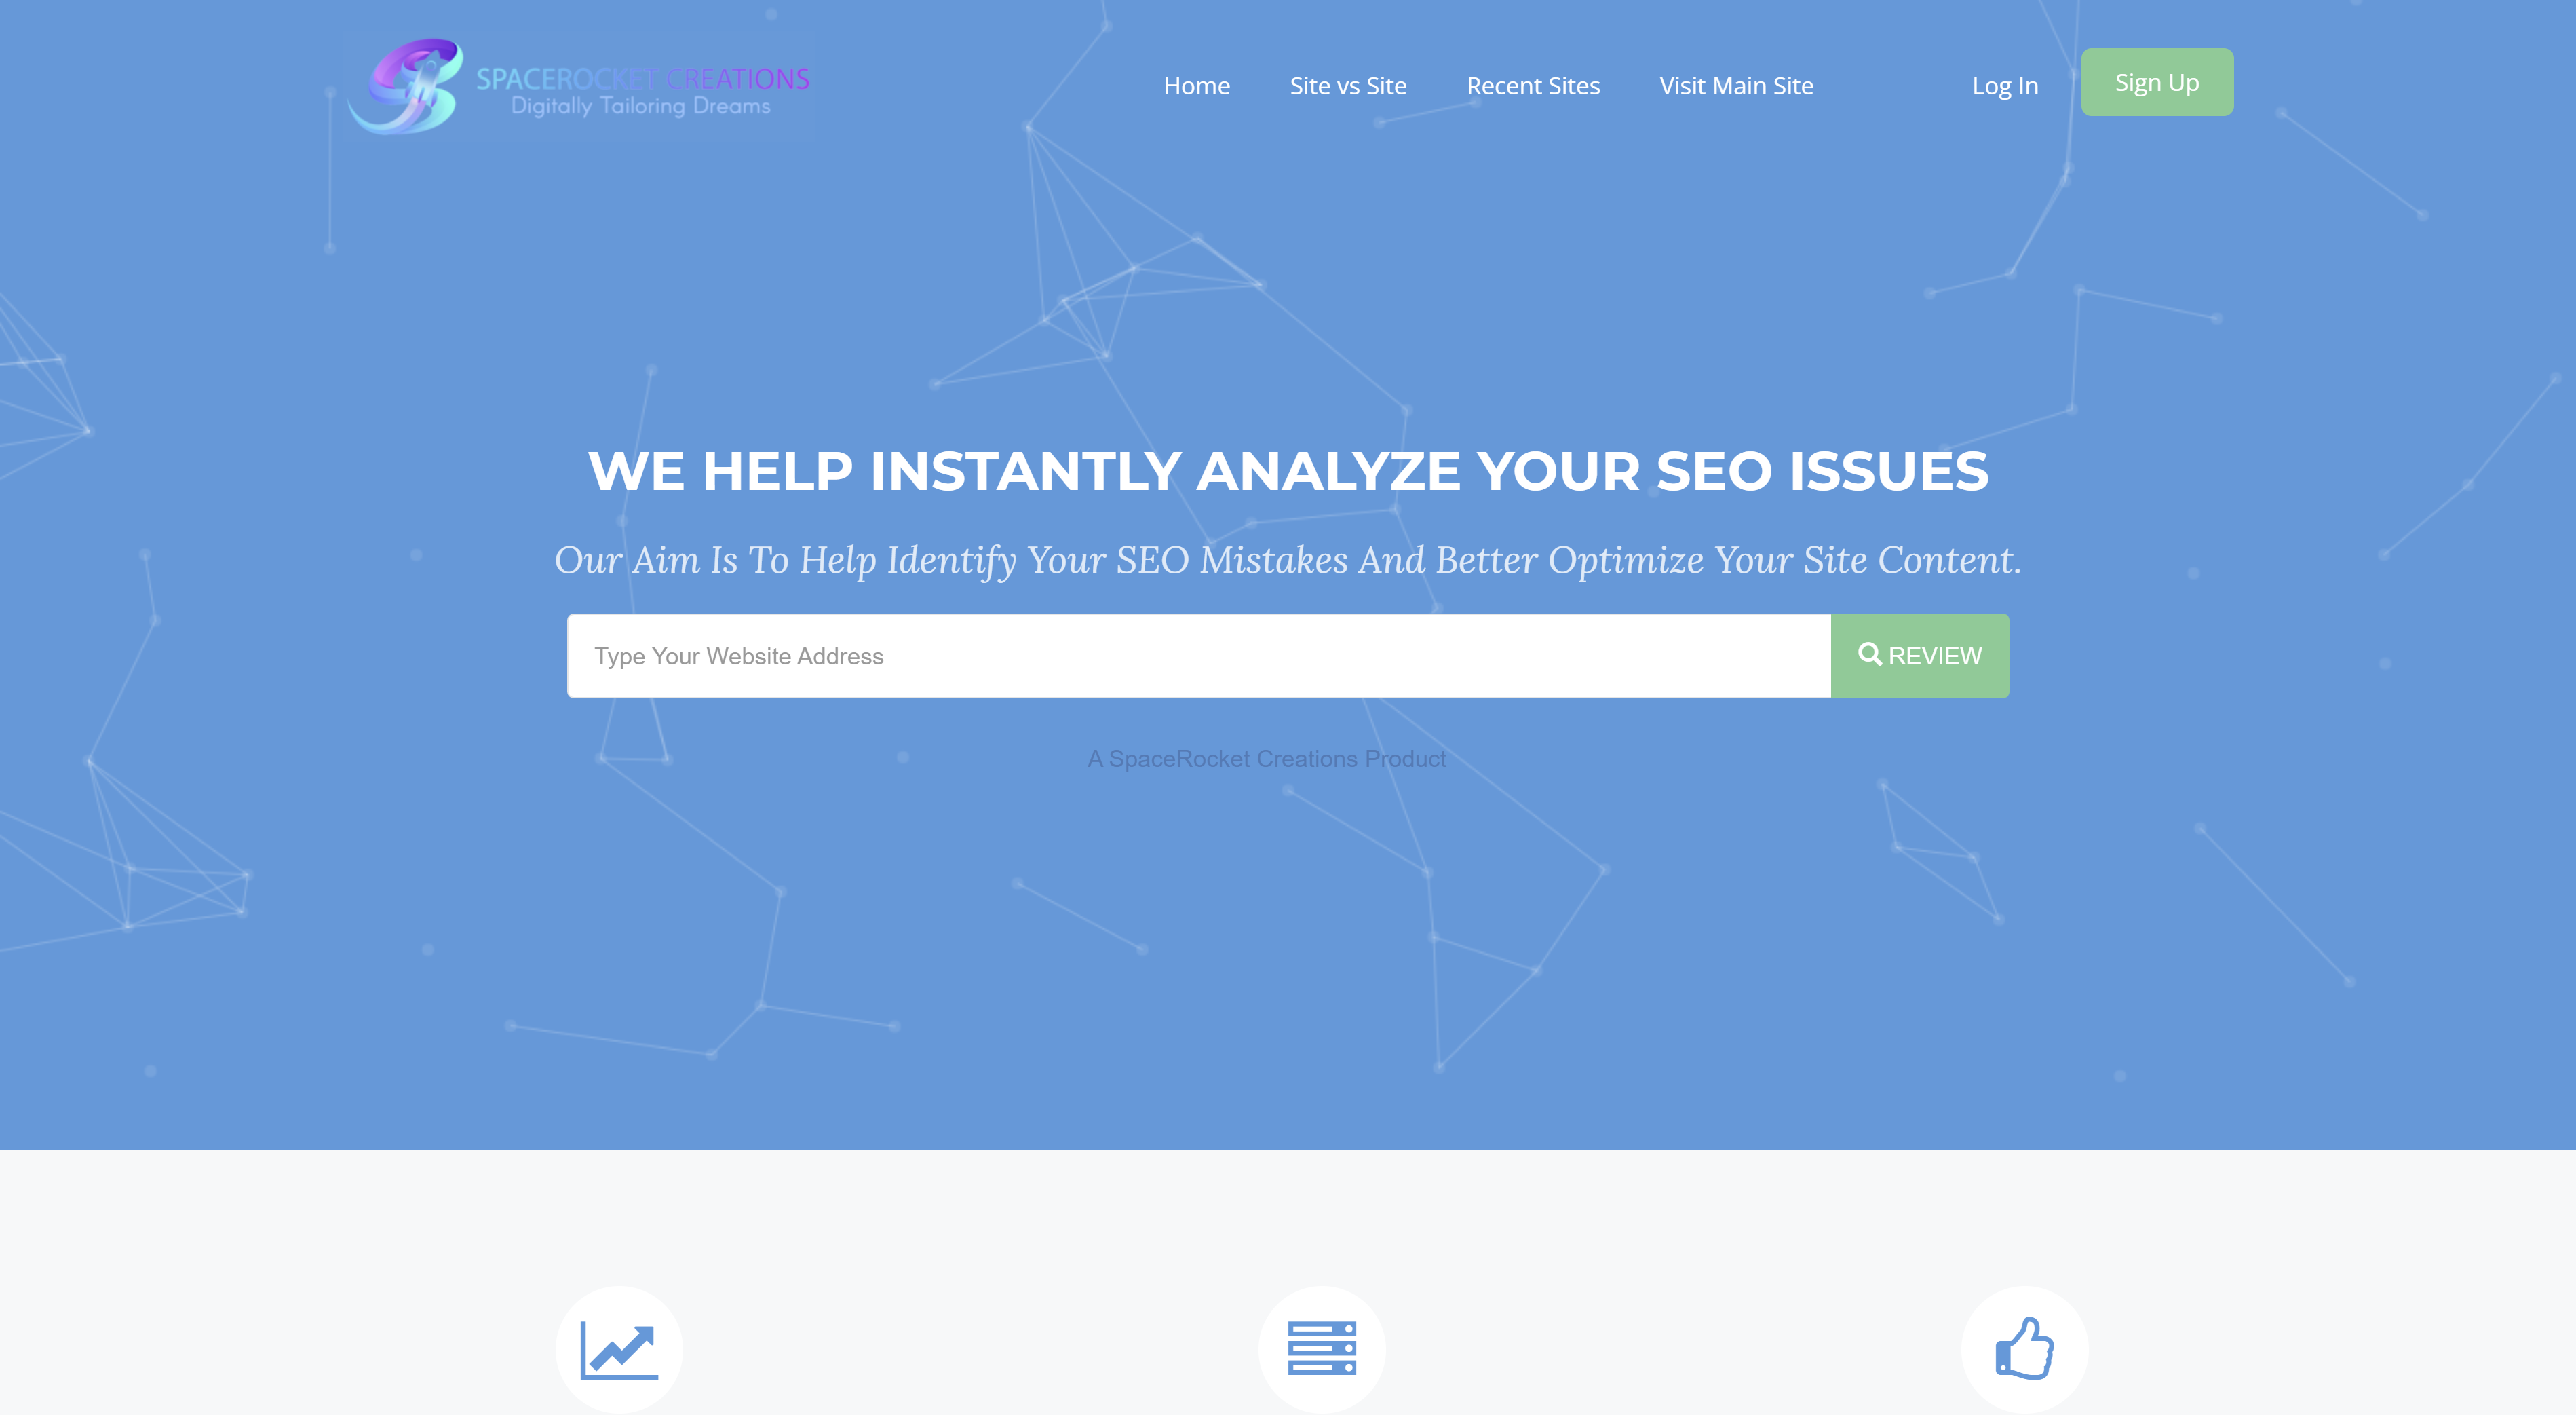 Home Page of SEO Website Reviewer